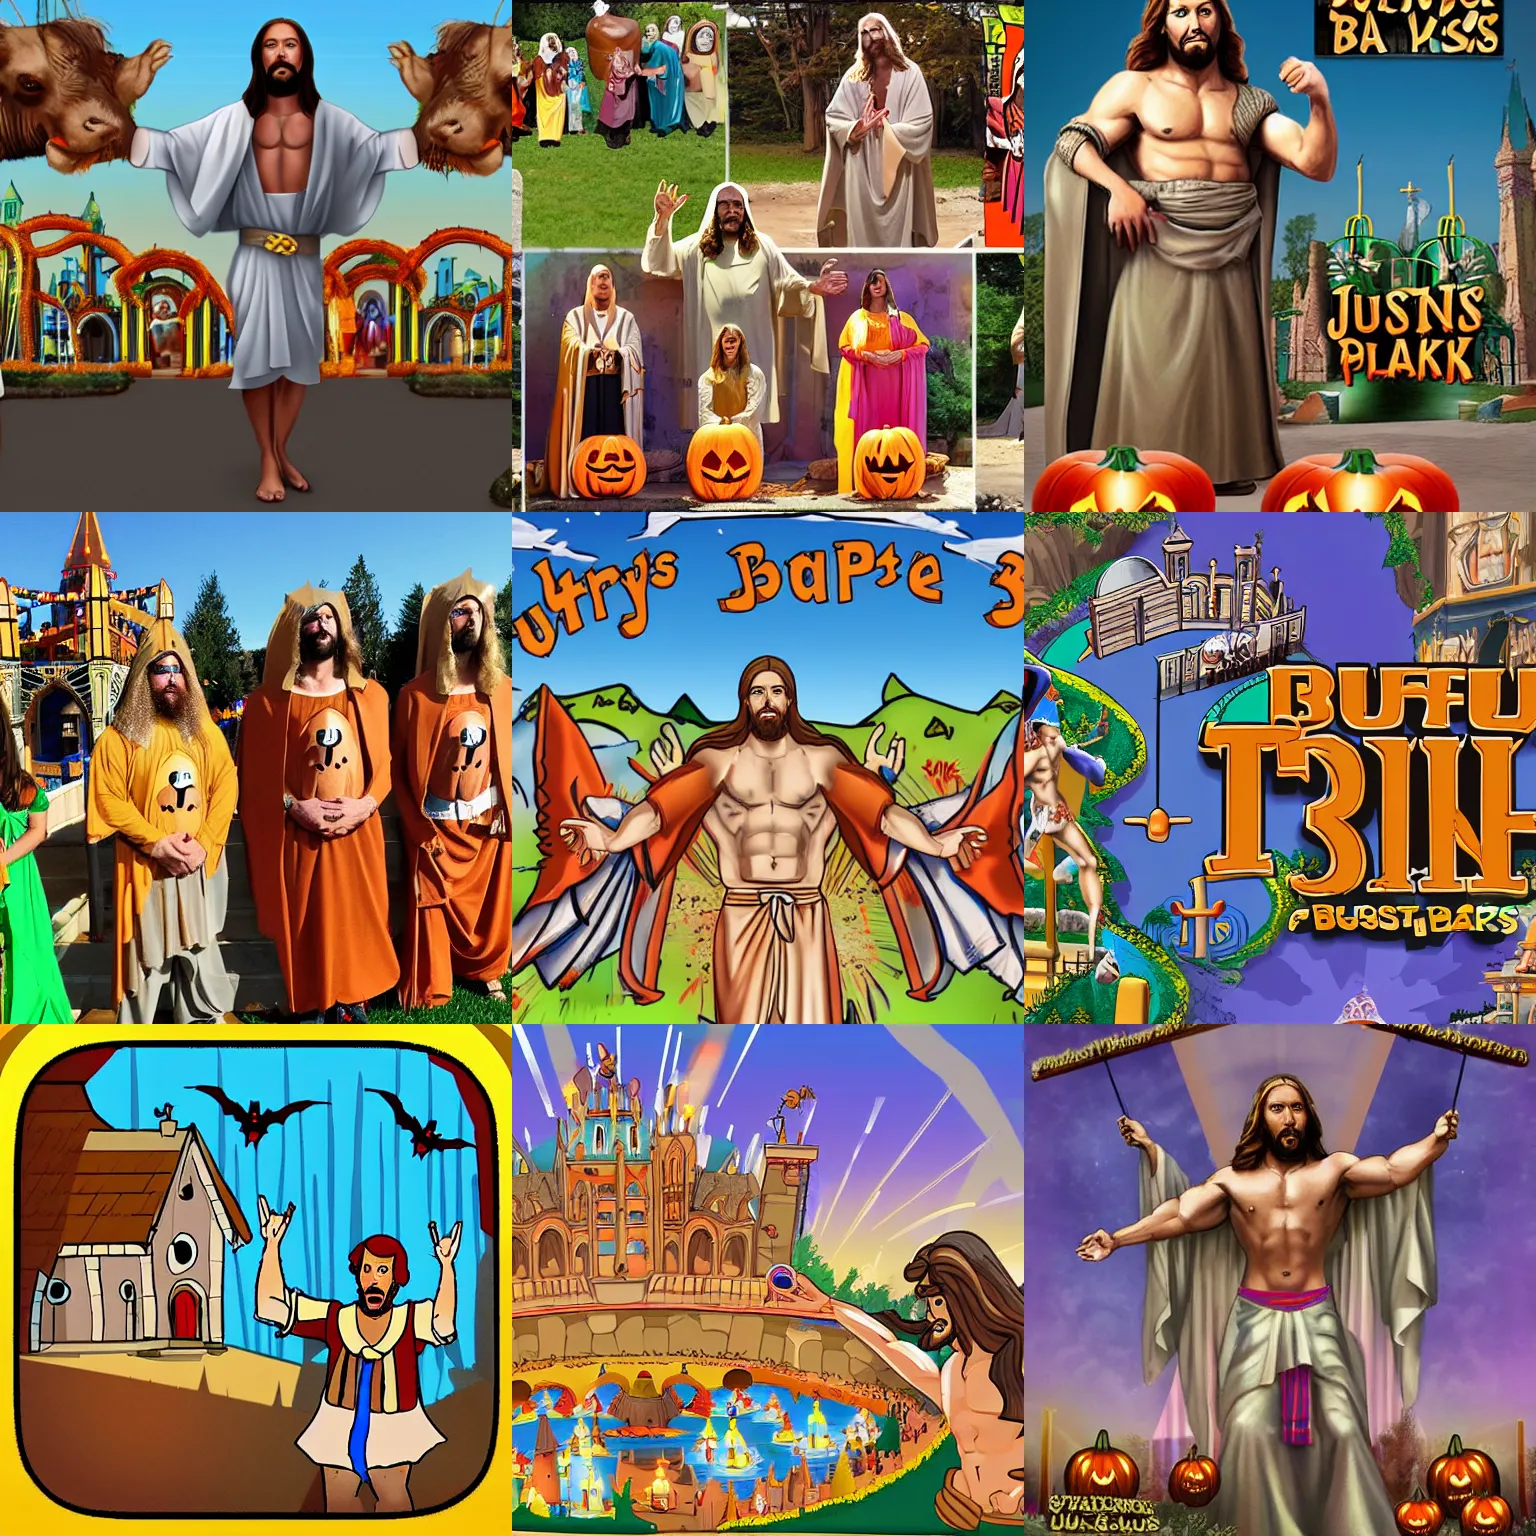 Prompt: buff jesus theme park in the style of crappy halloween costumes